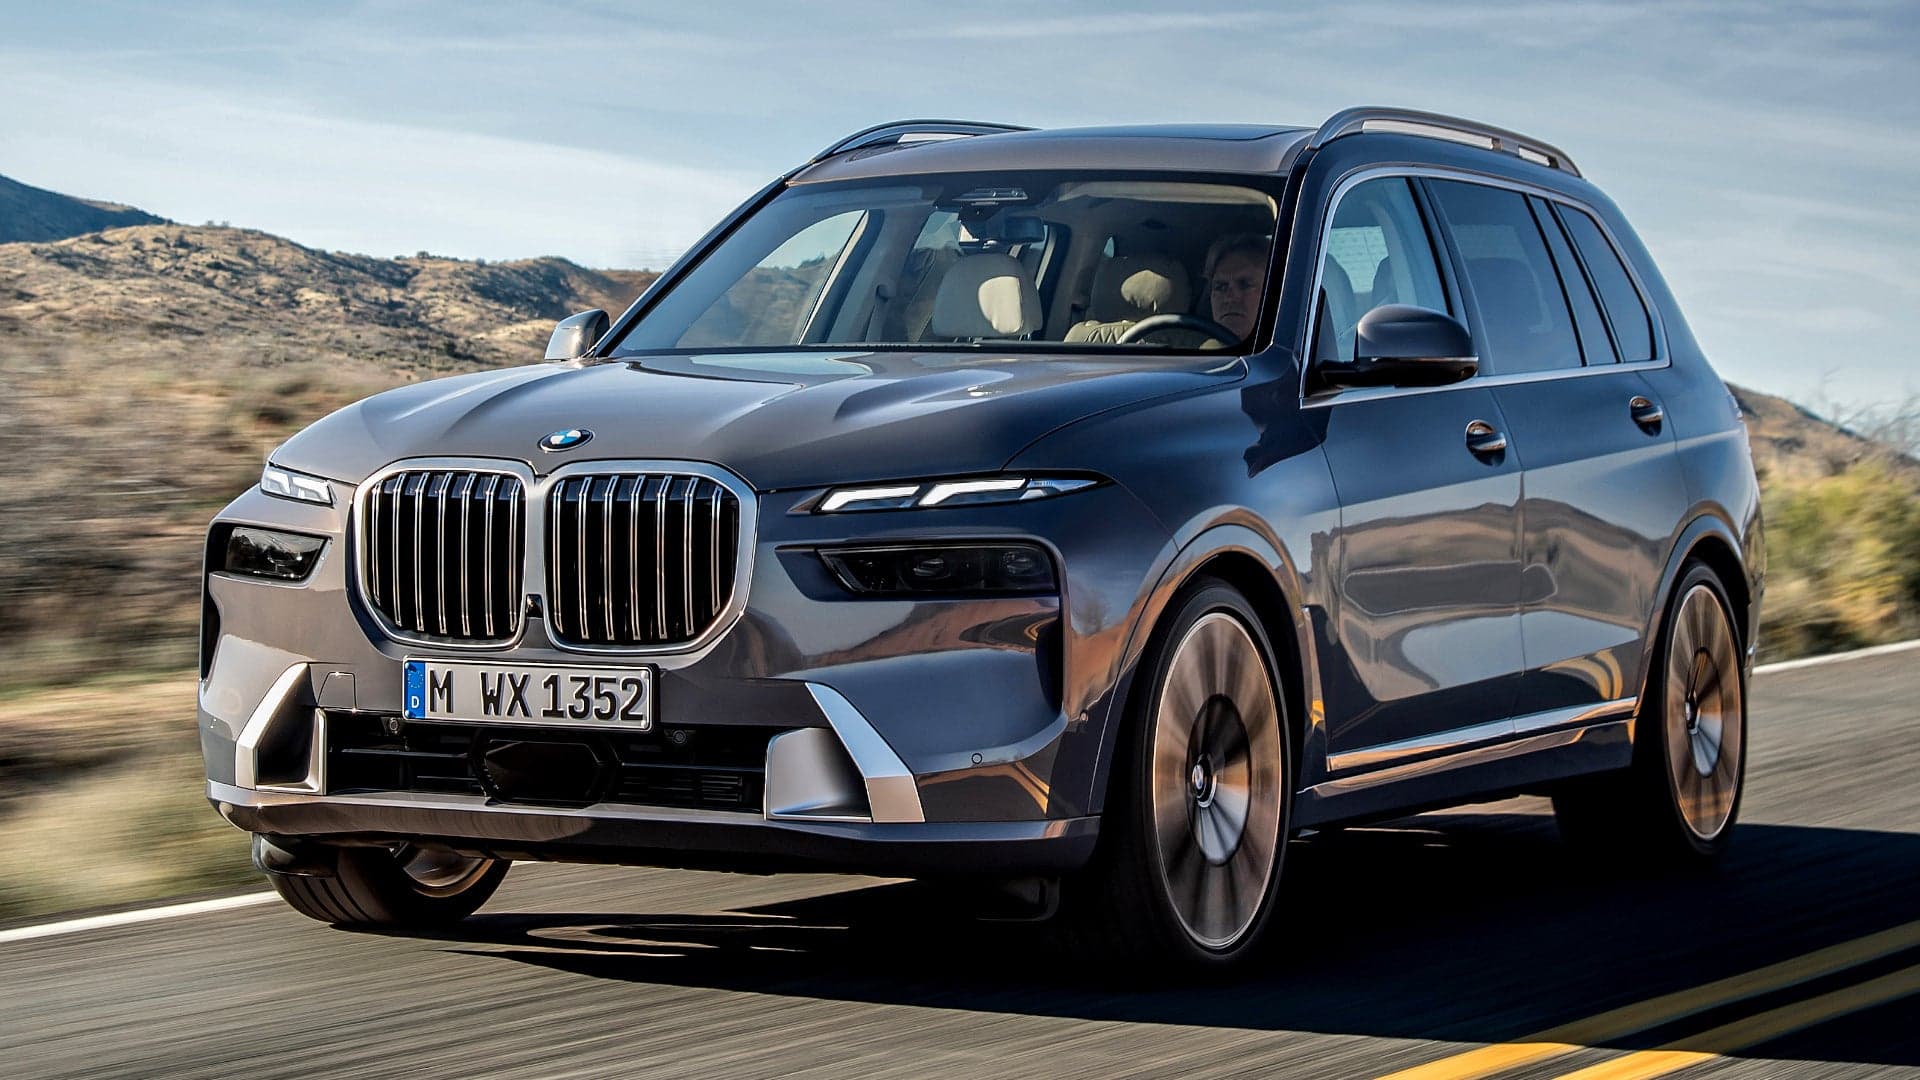 2023 BMW X7: BMW’s Biggest SUV Gets A ‘More Is More’ Facelift